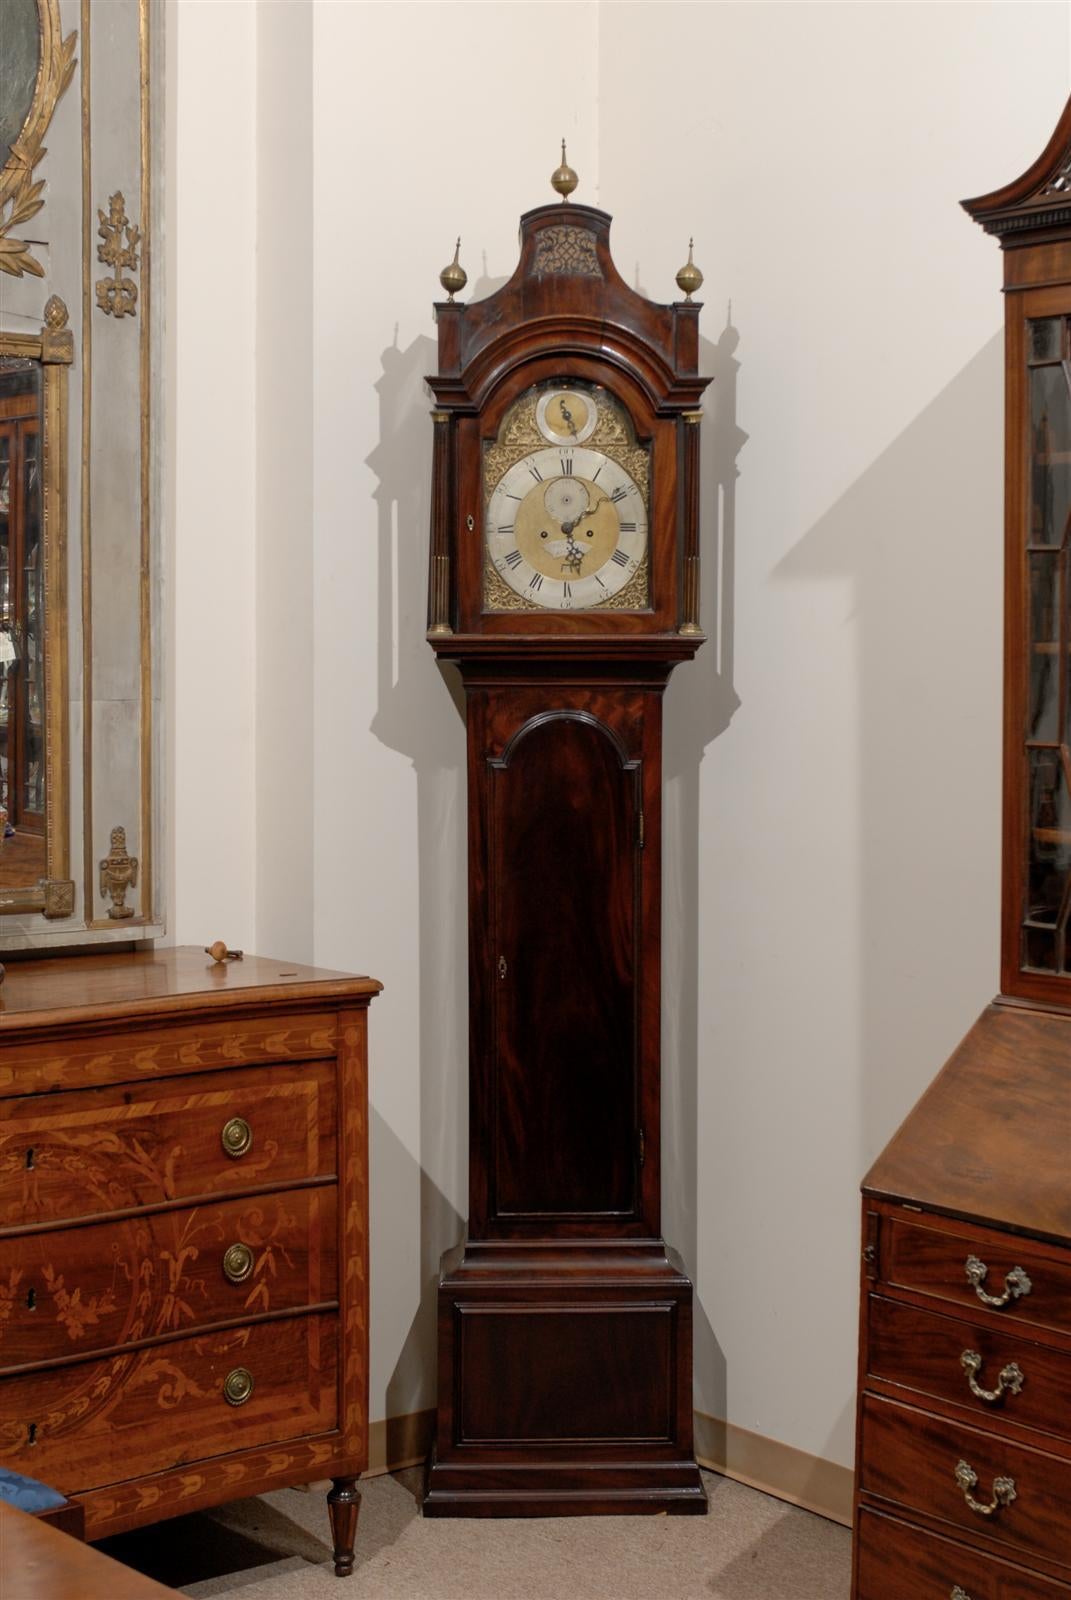 18th century English mahogany tall case clock with brass and steel face, signed "John Boyce, London."